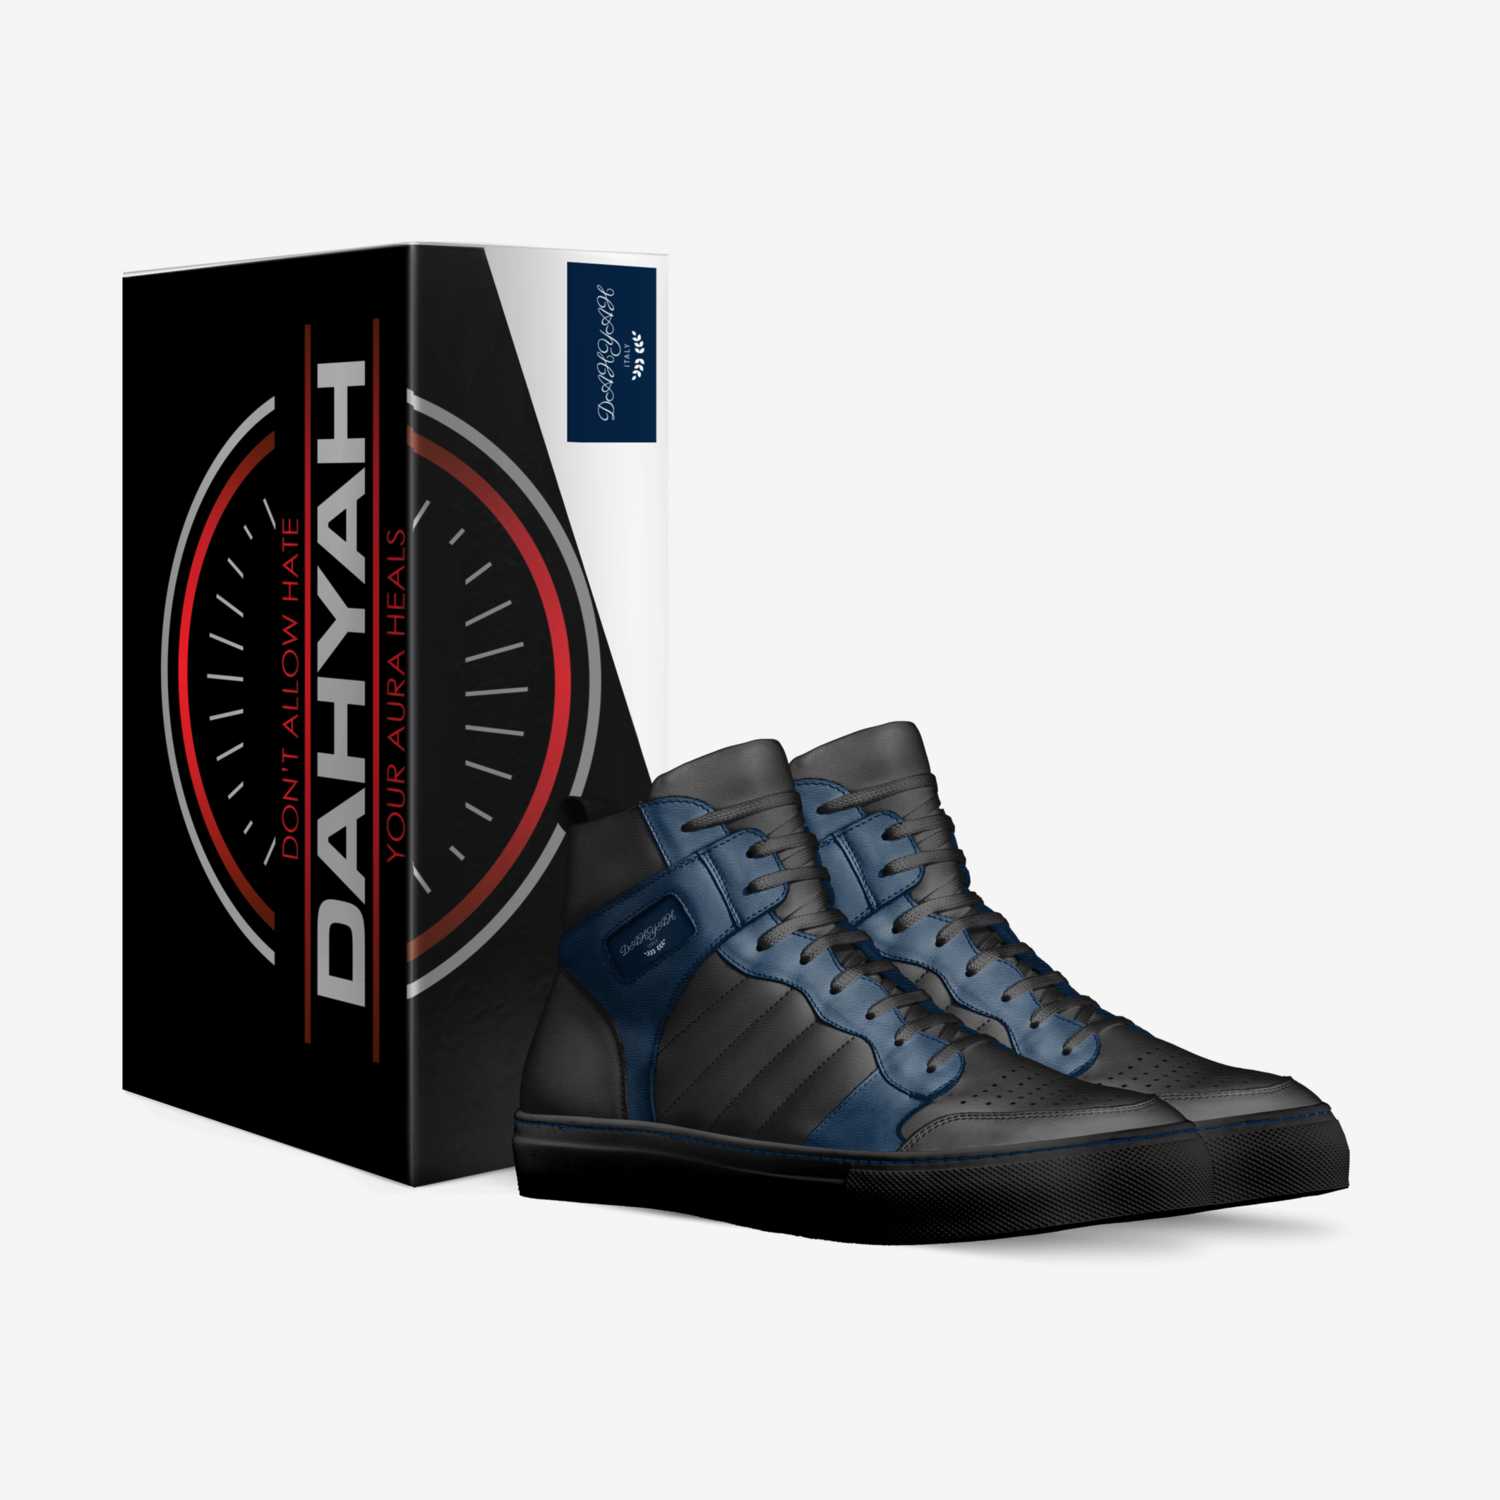 DAHYAH custom made in Italy shoes by Alteria Smart | Box view